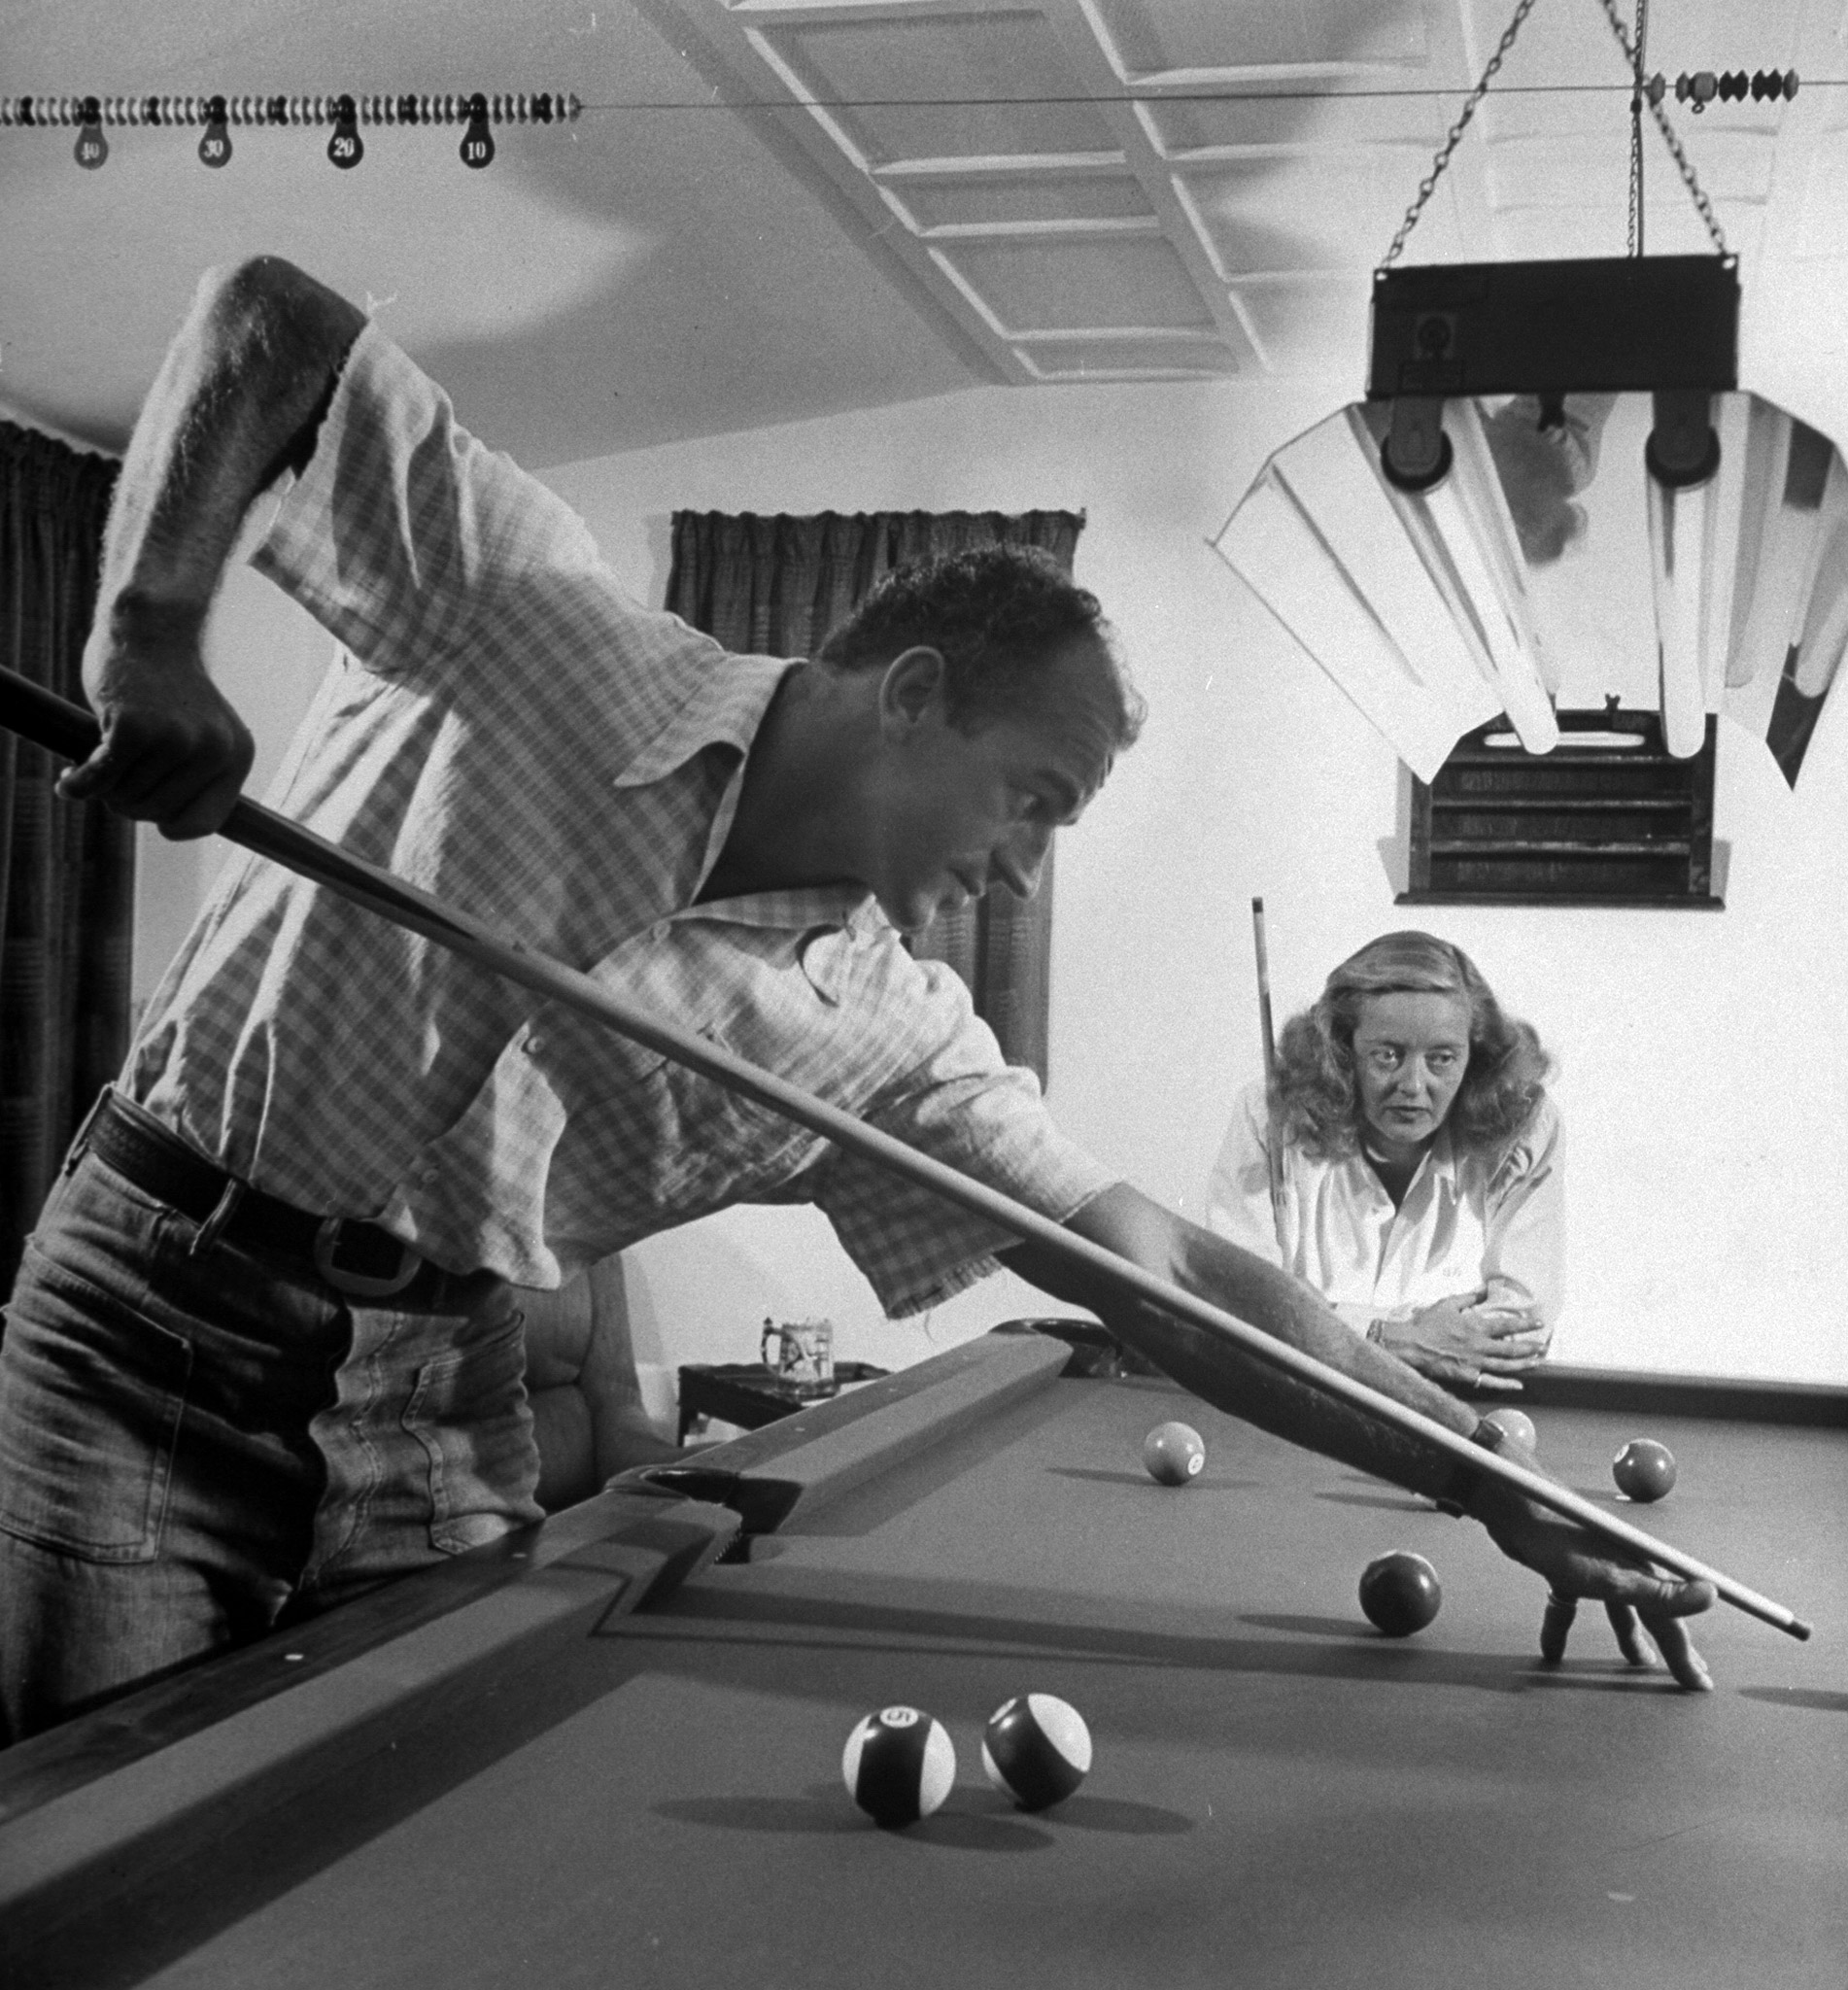 Bette Davis and her third husband, William Grant Sherry, playing billiards at home in California, 1947.